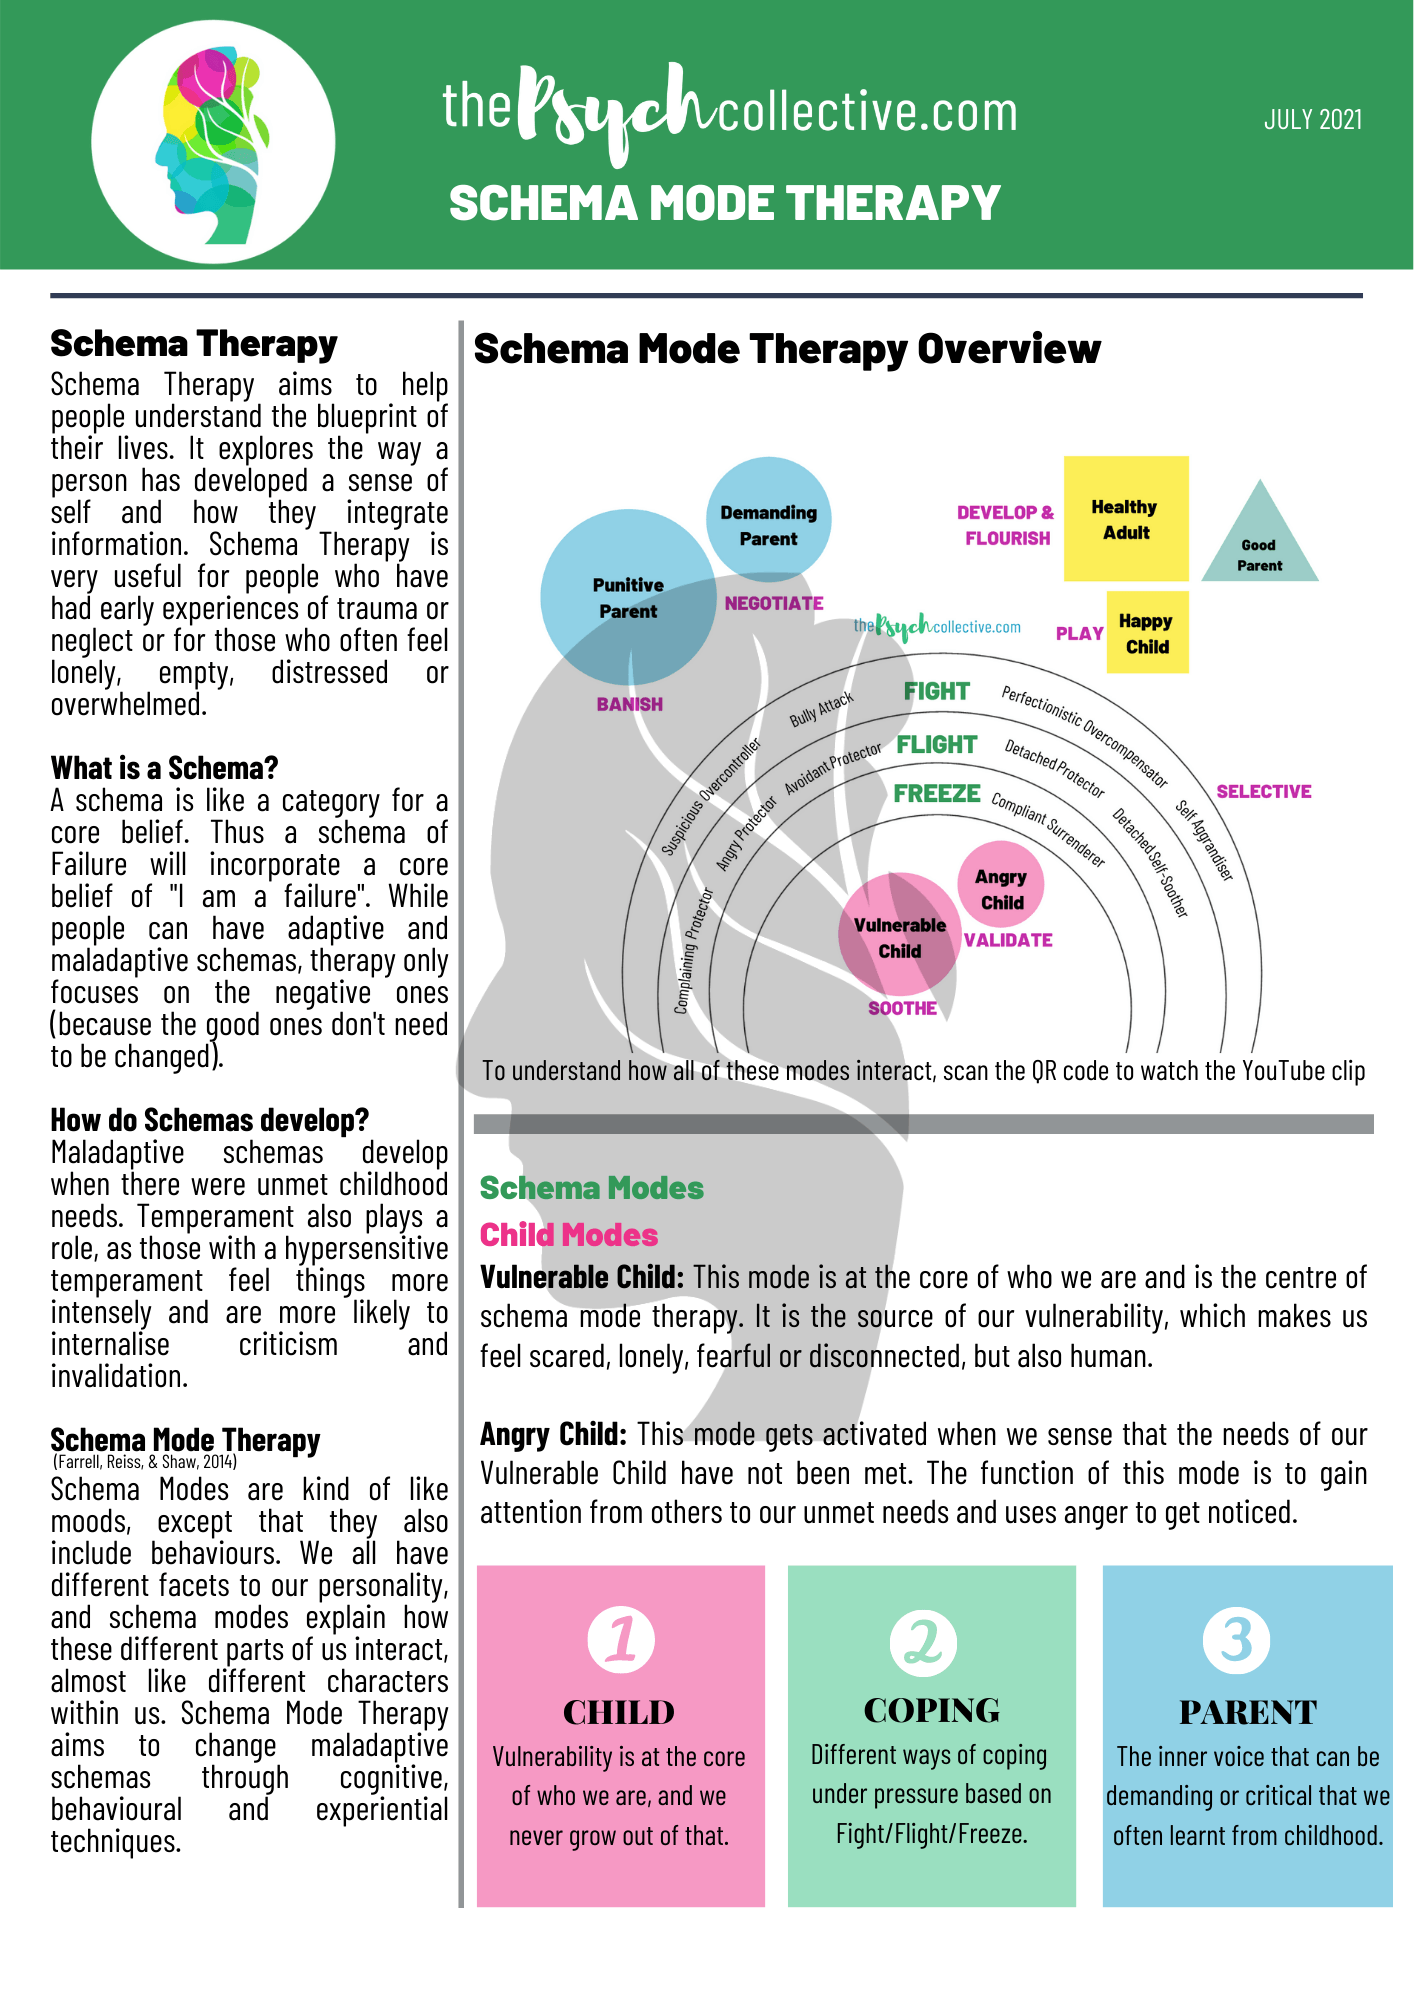 Schema Mode Therapy handout from The Psych Collective